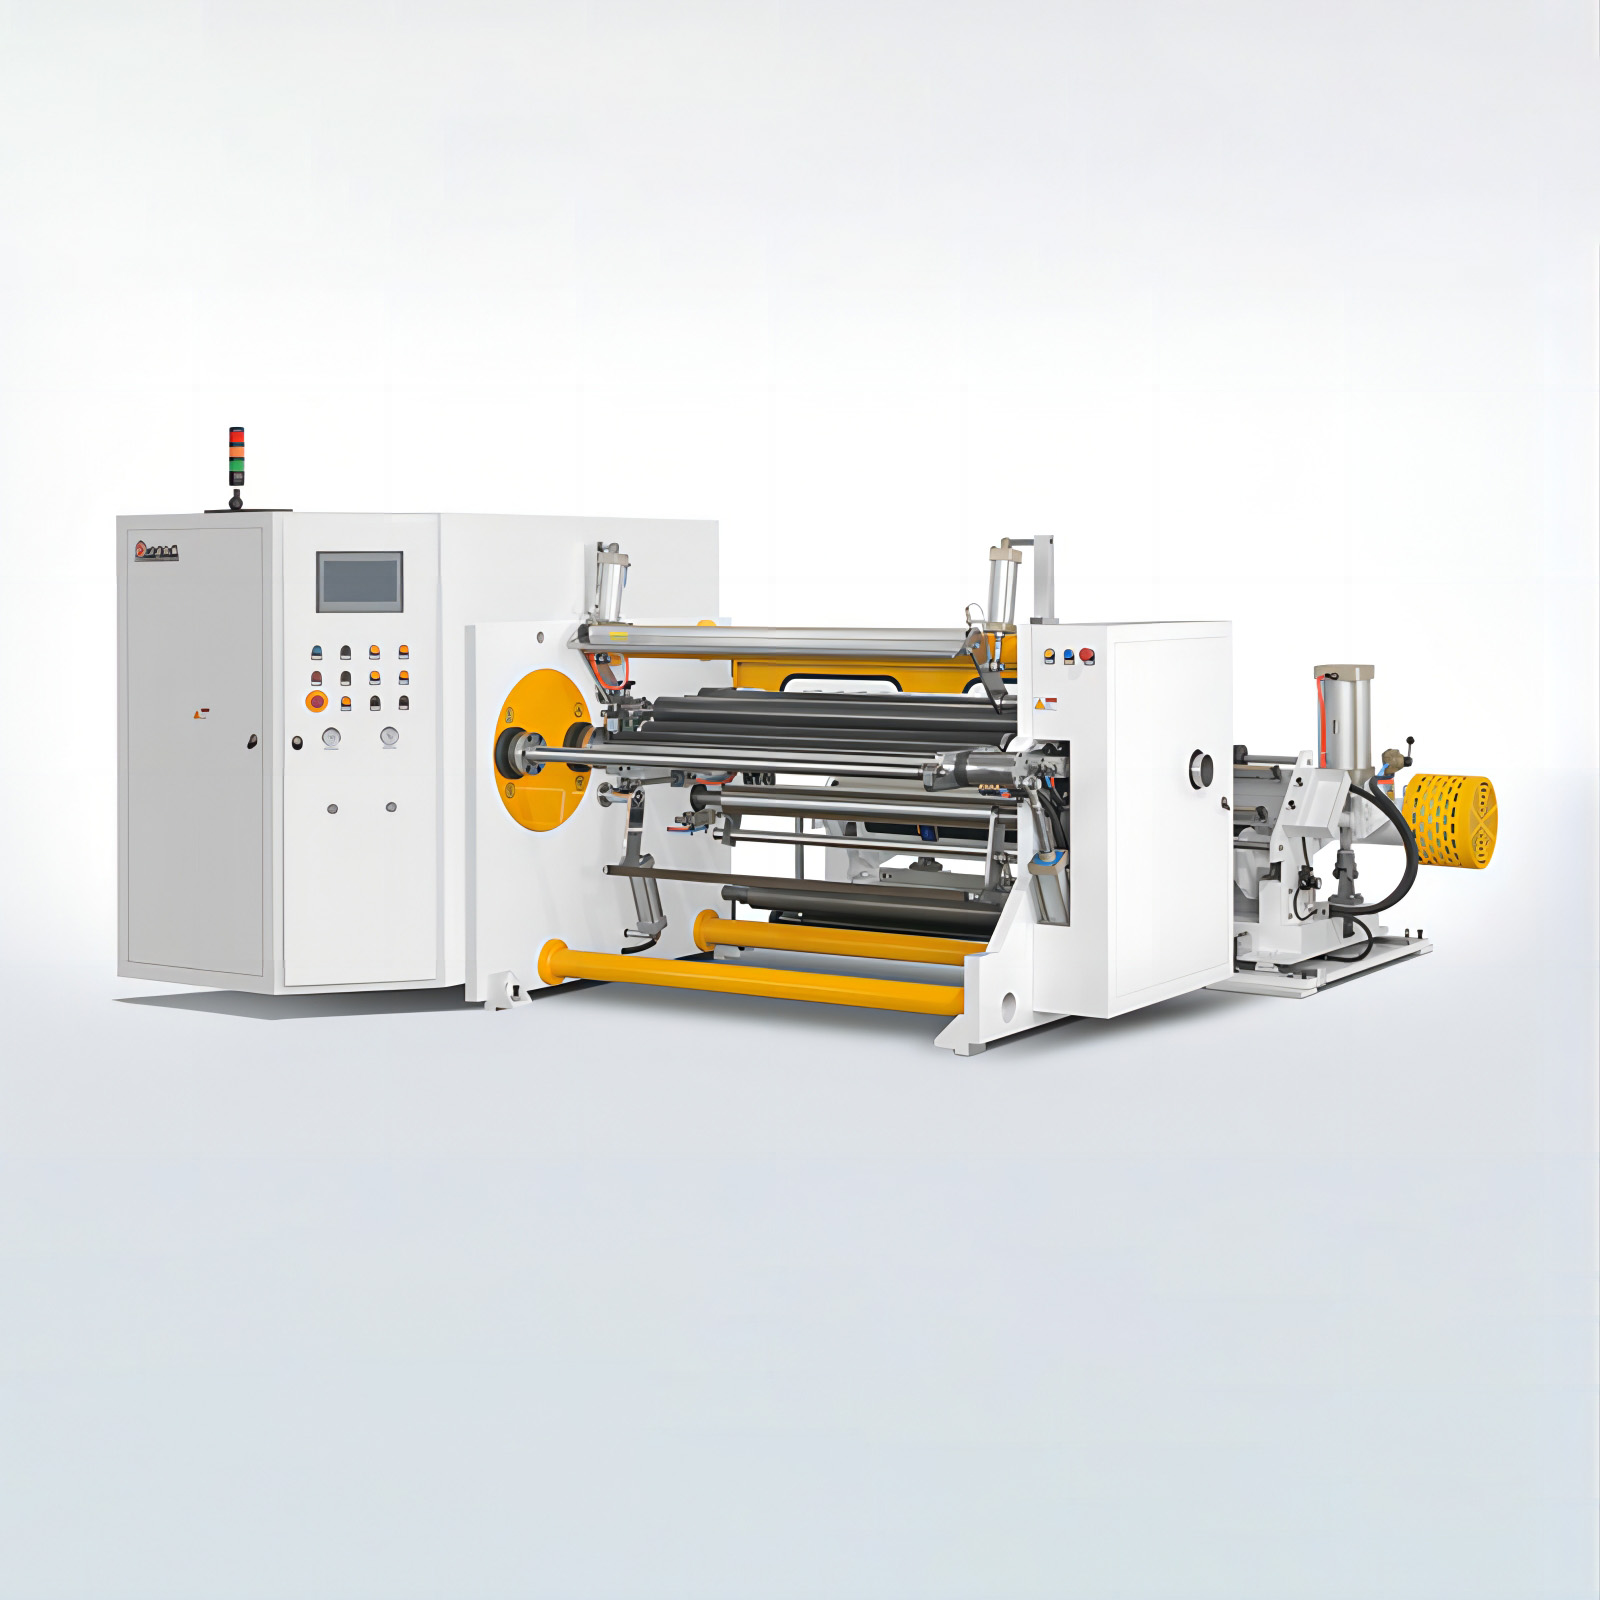 High-Quality Slitting and Rewinding Machine for Efficient Production